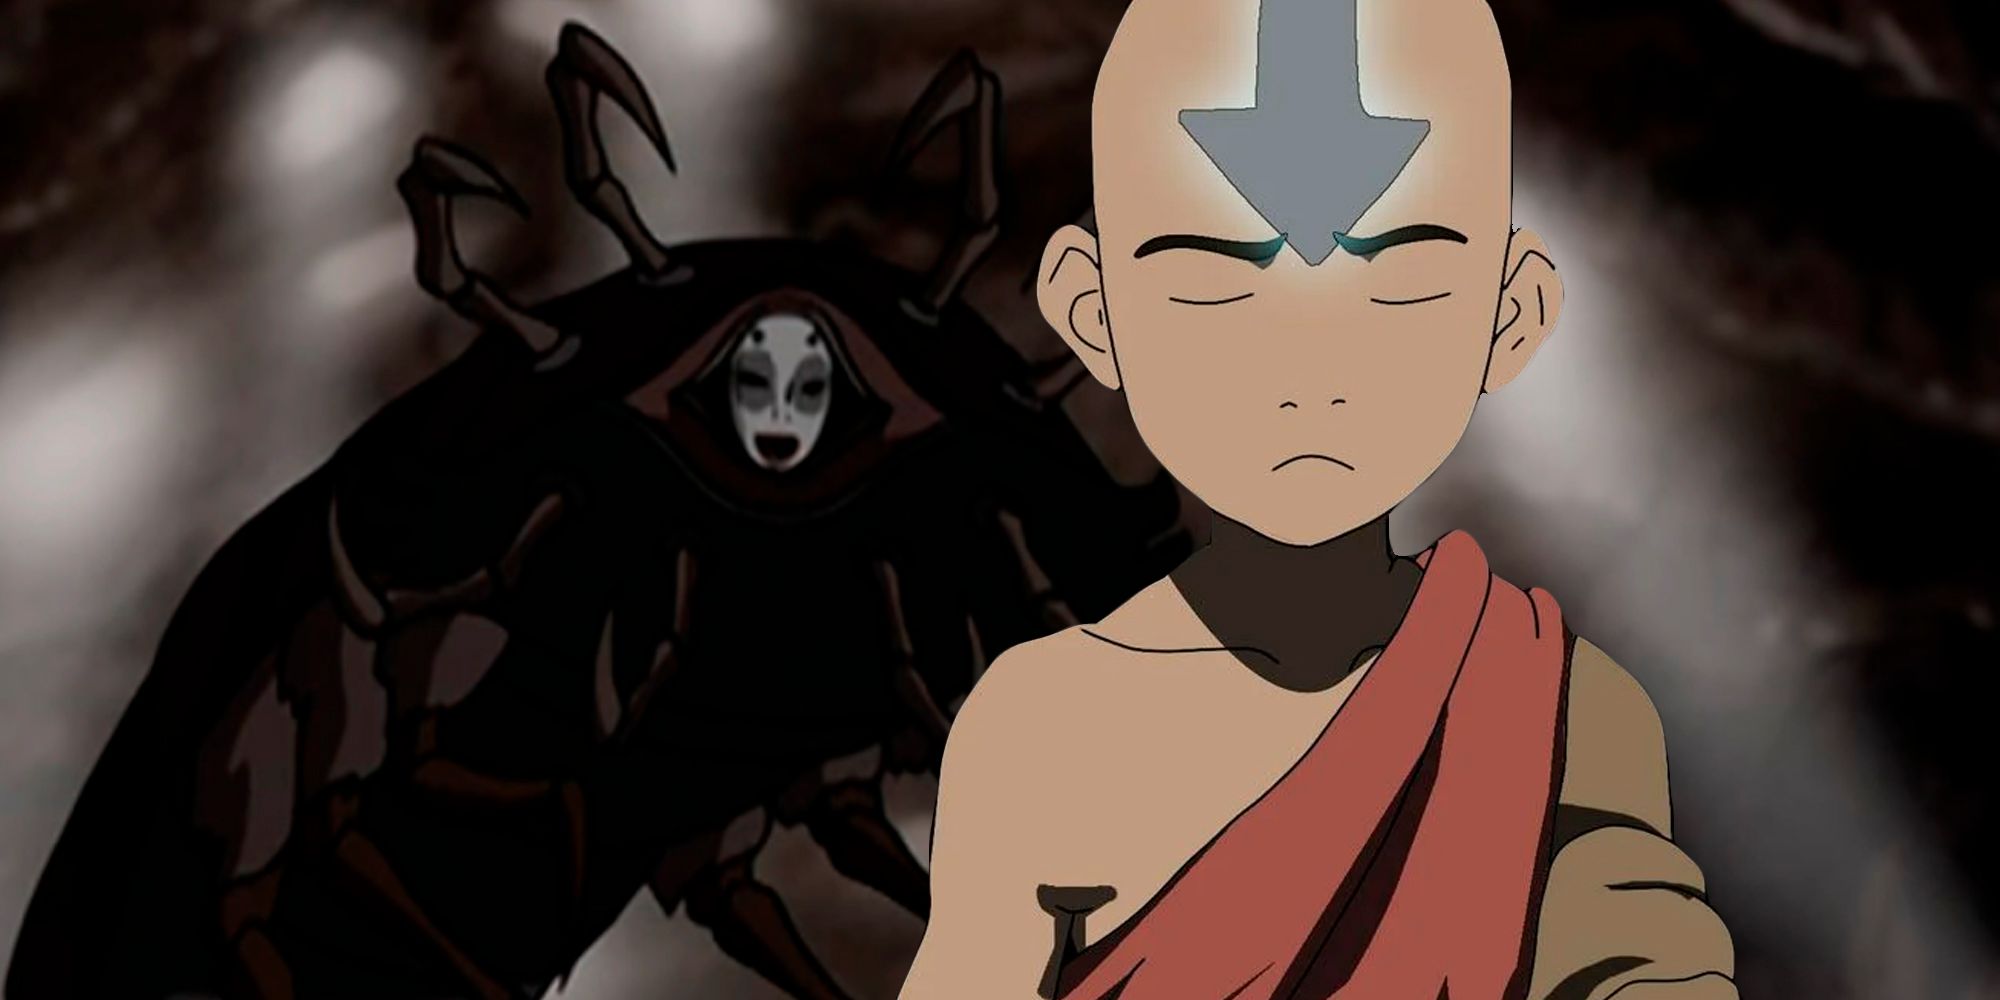 Aang had to face the face stealing spirit Koh in Avatar the Last Airbender season 1